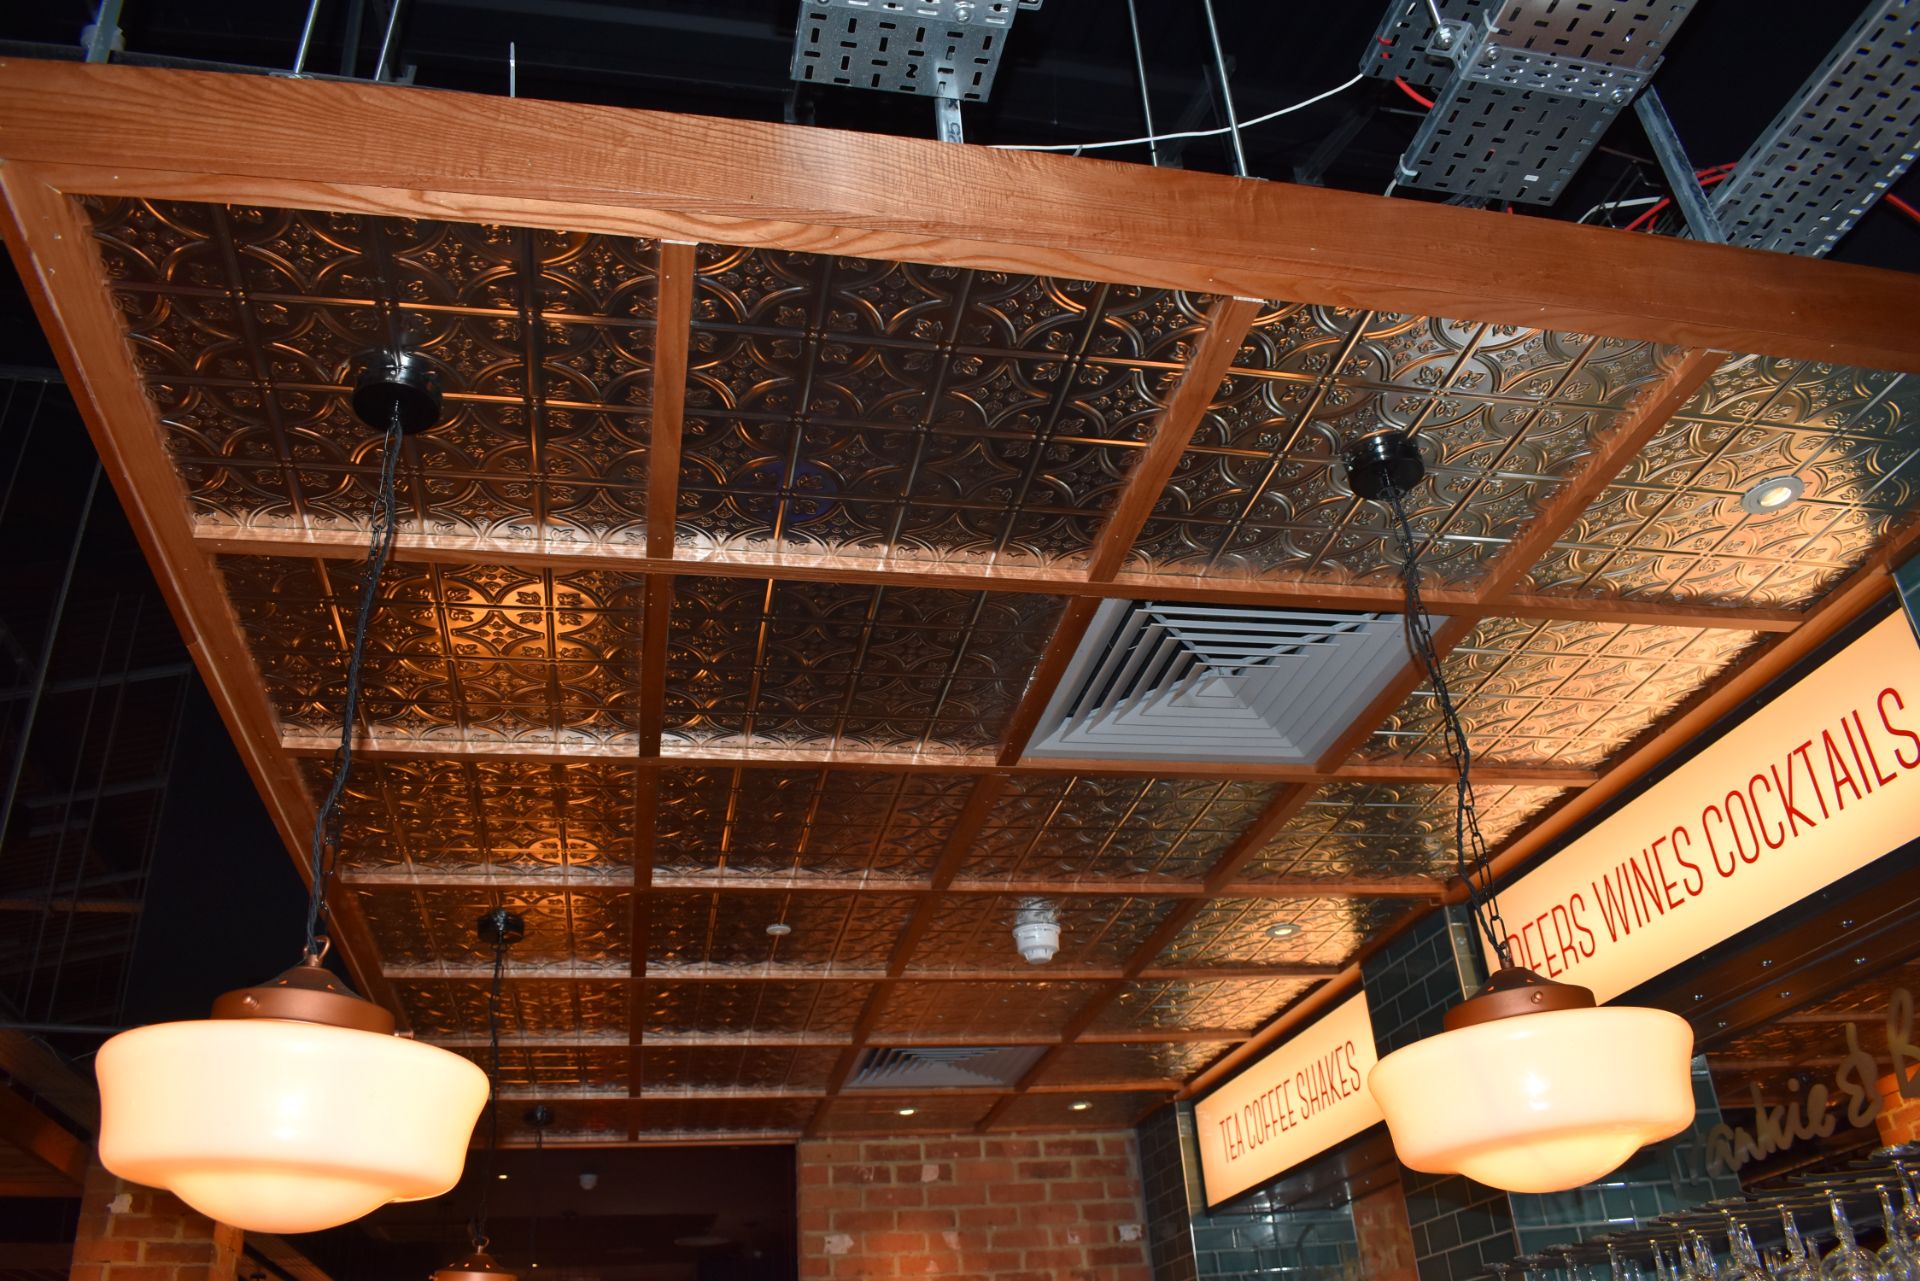 1 x Suspended Decorative Ceiling Feature With a Light Wood Frame and Ornate Tin Insert Panels - L470 - Image 8 of 12